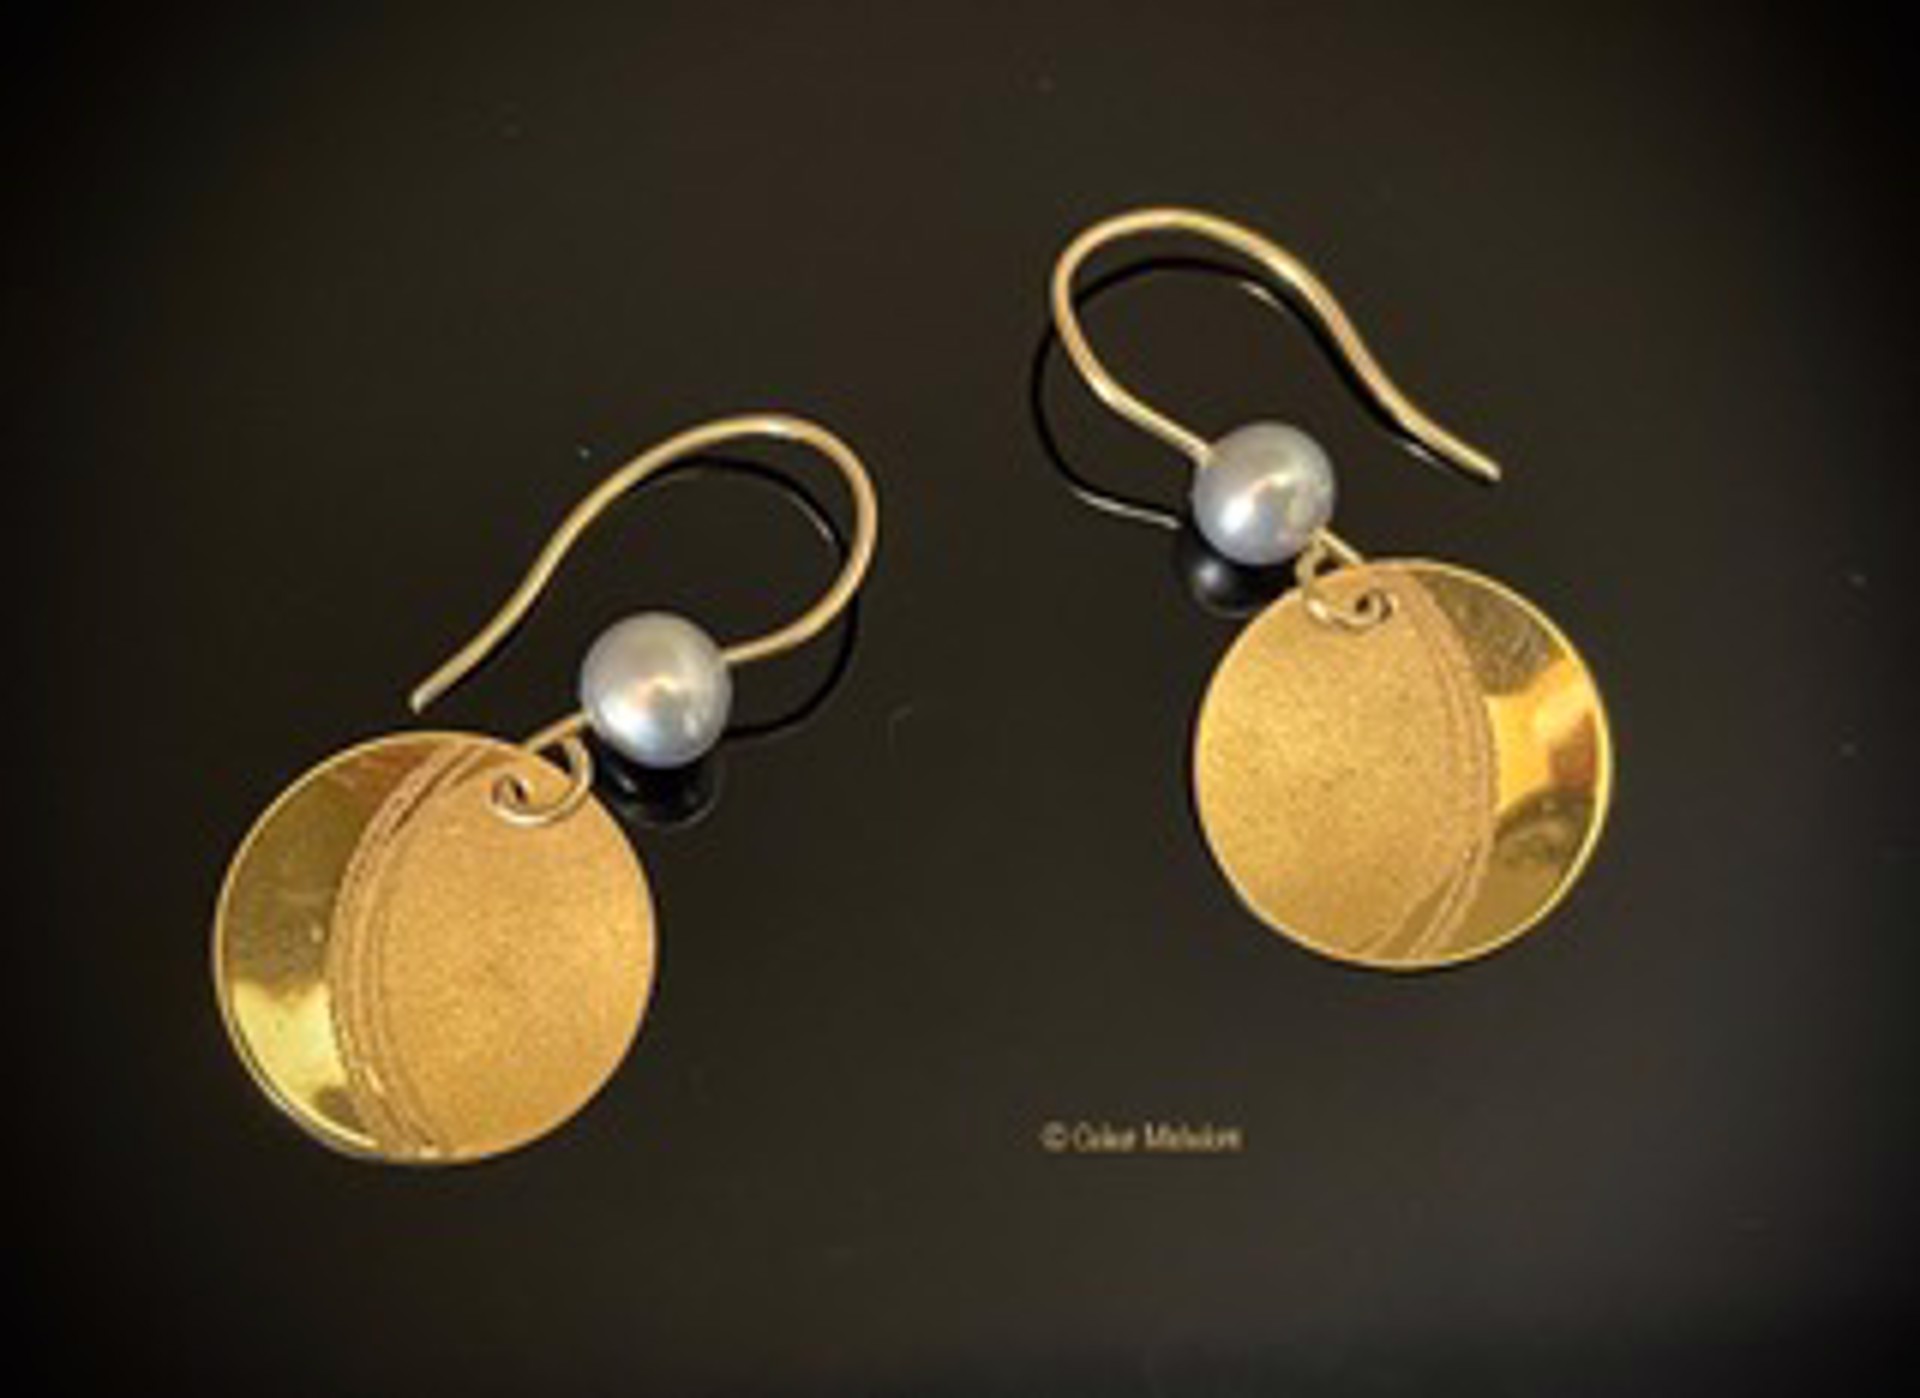 Luna 5/8" earrings with silver round cultured freshwater pearl by Celest Michelotti